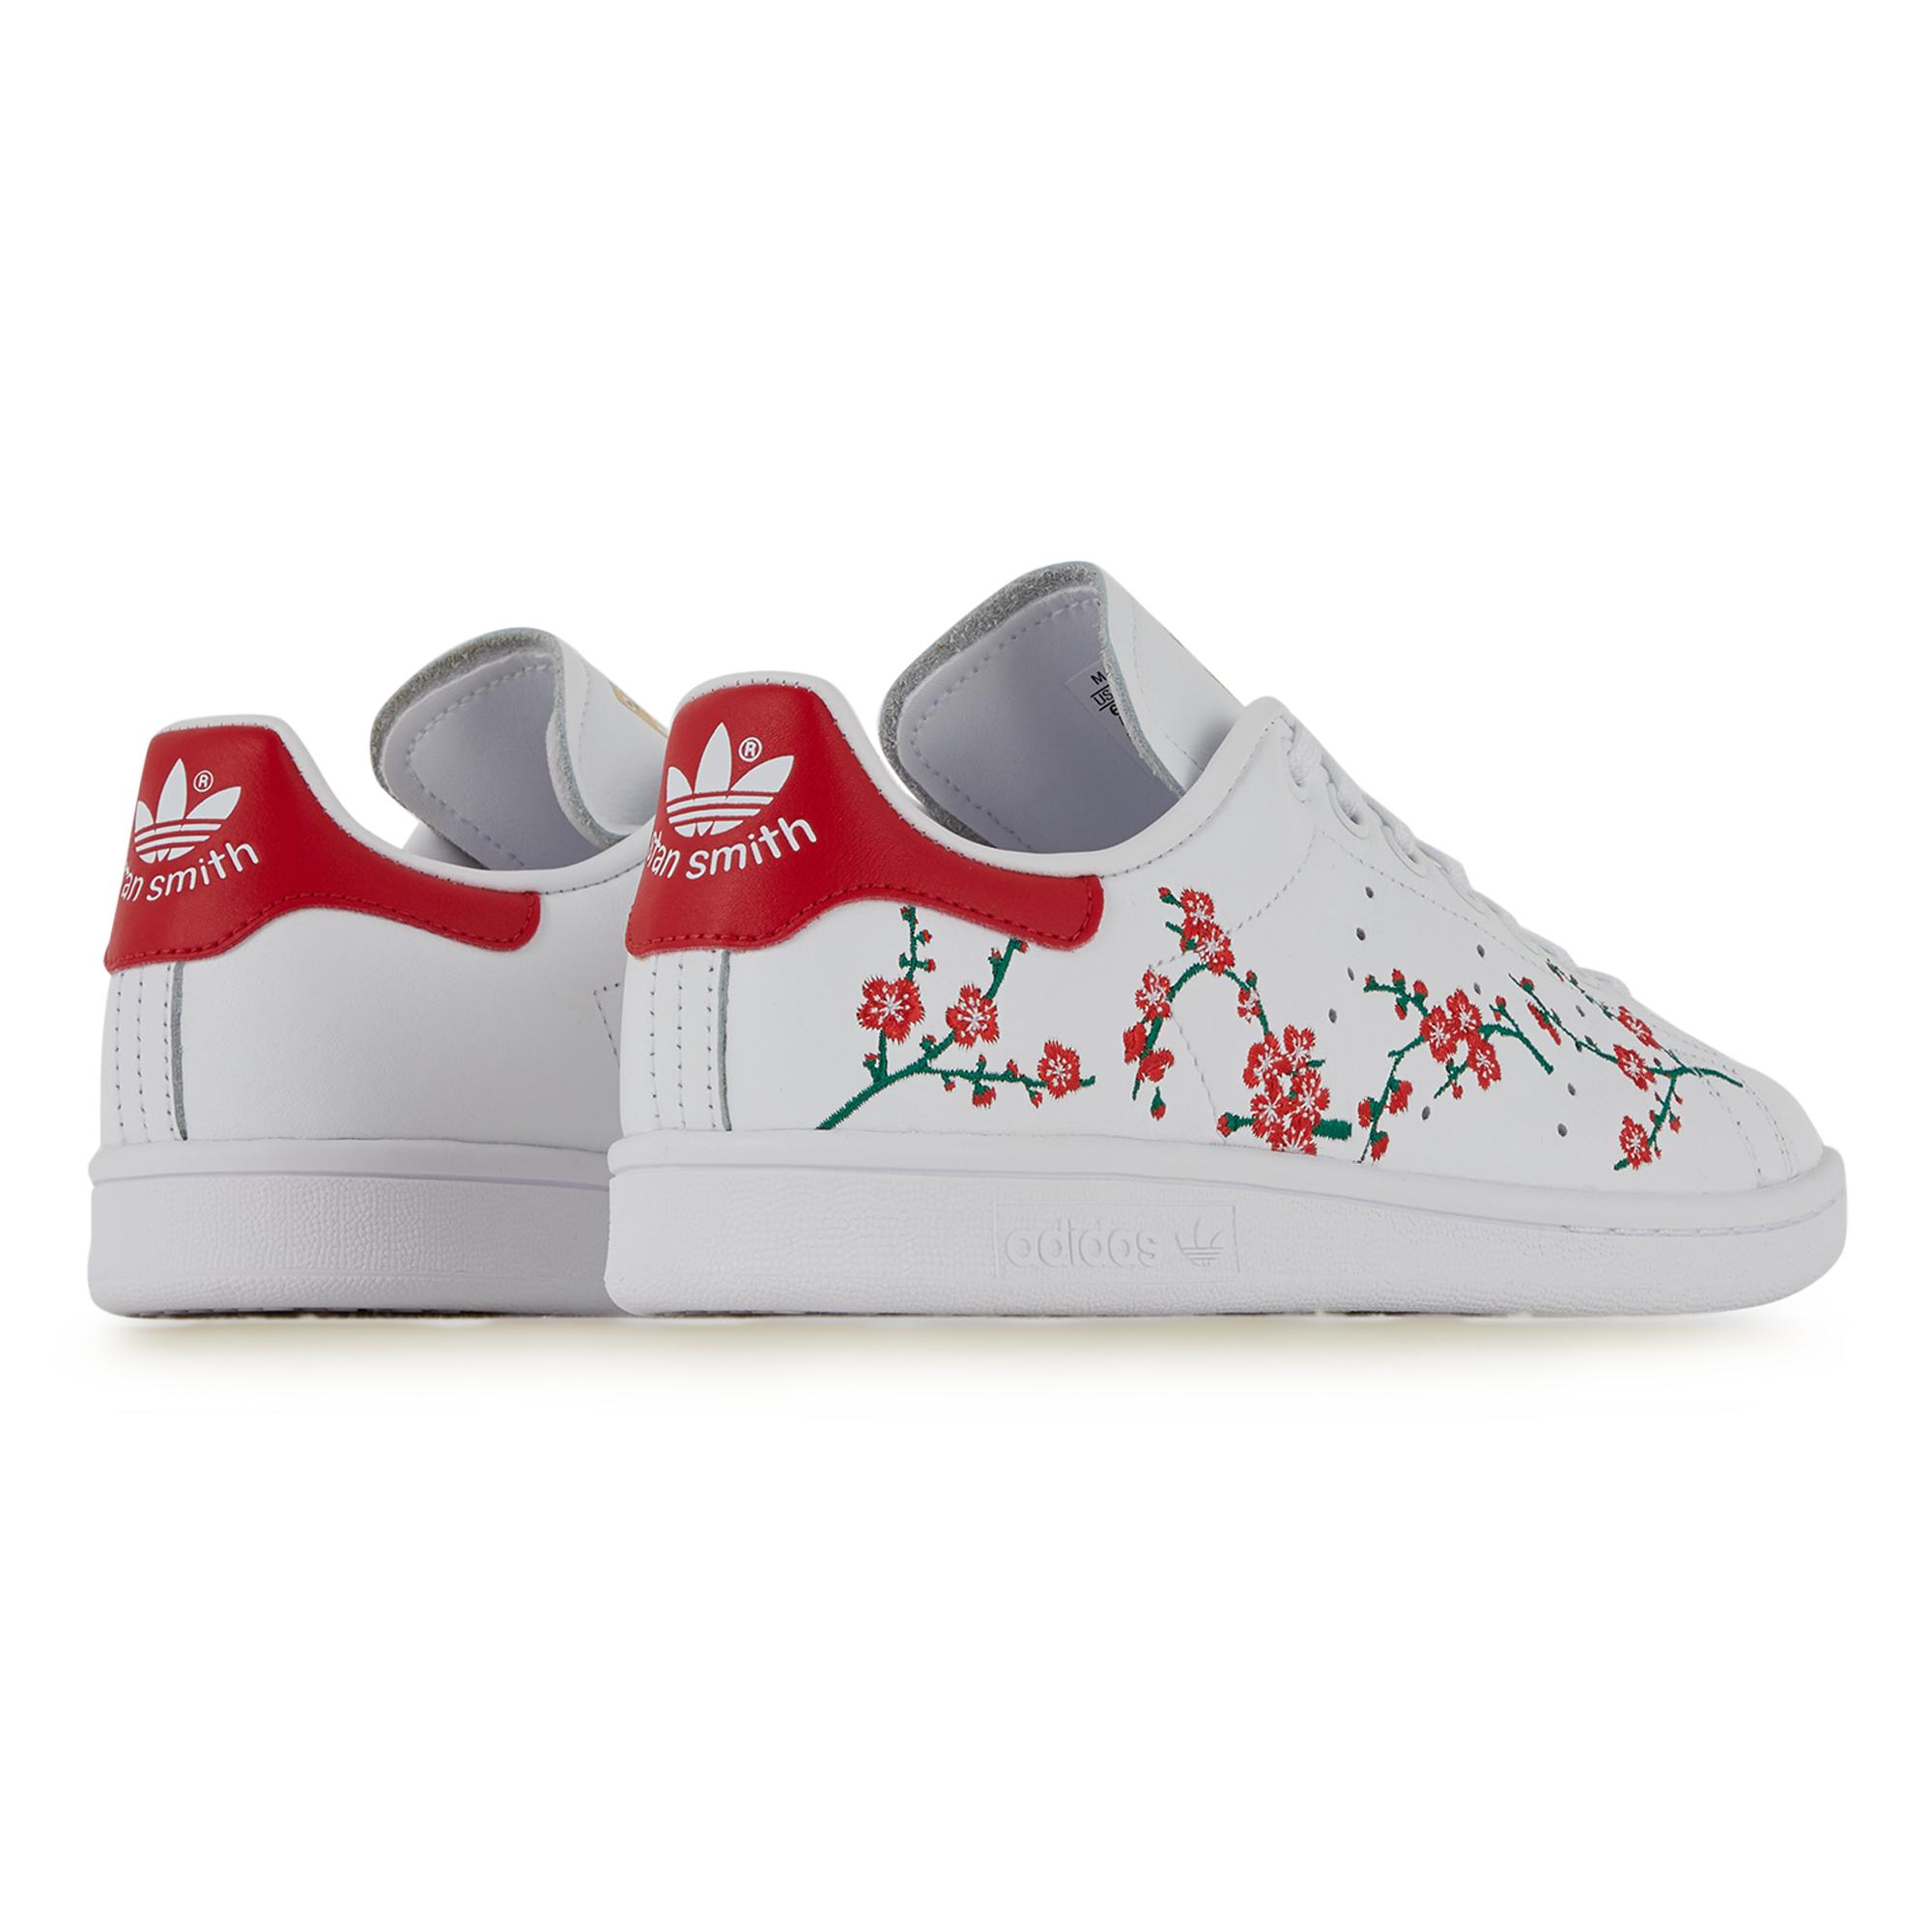 Adidas Stan Smith Flower Femme Flash Sales, SAVE 37% - aveclumiere.com